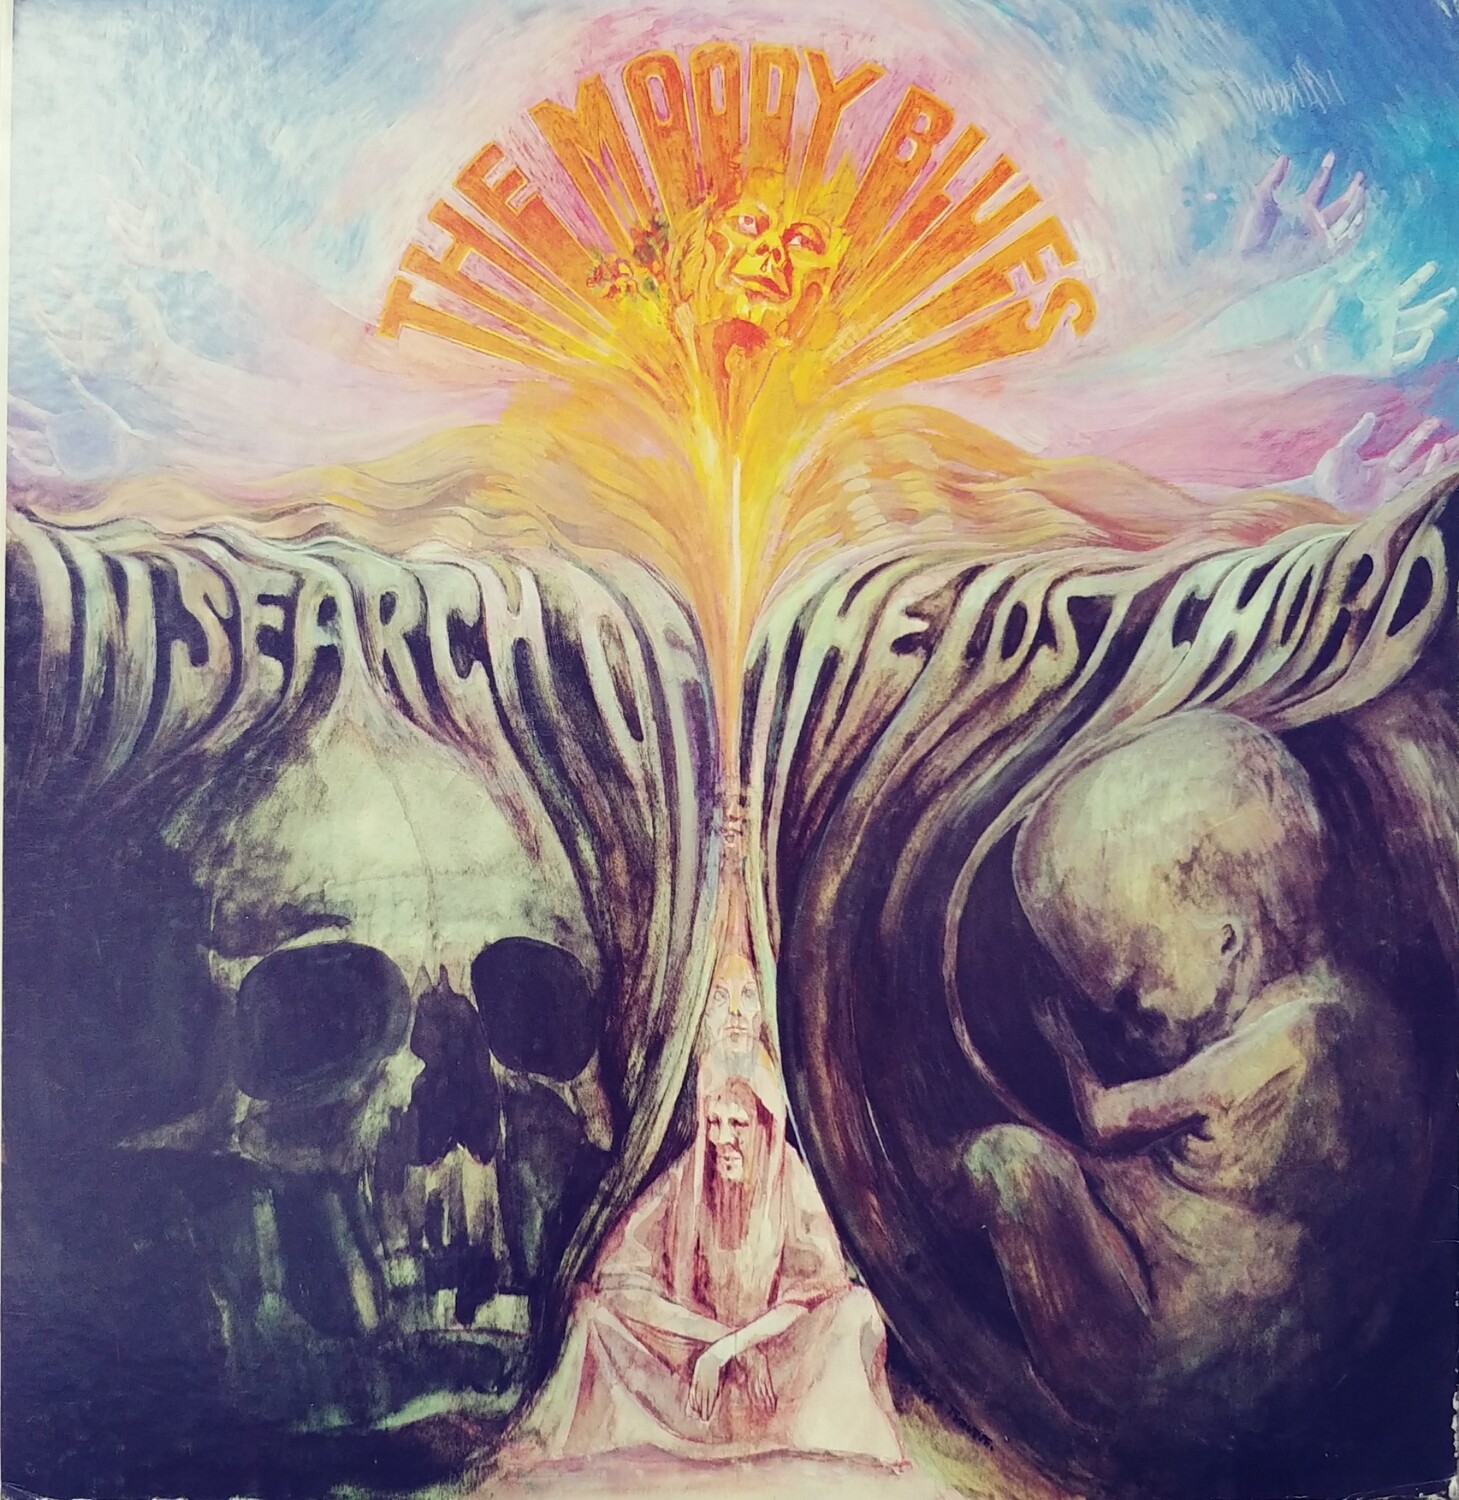 The Moody Blues - In search of the lost chord